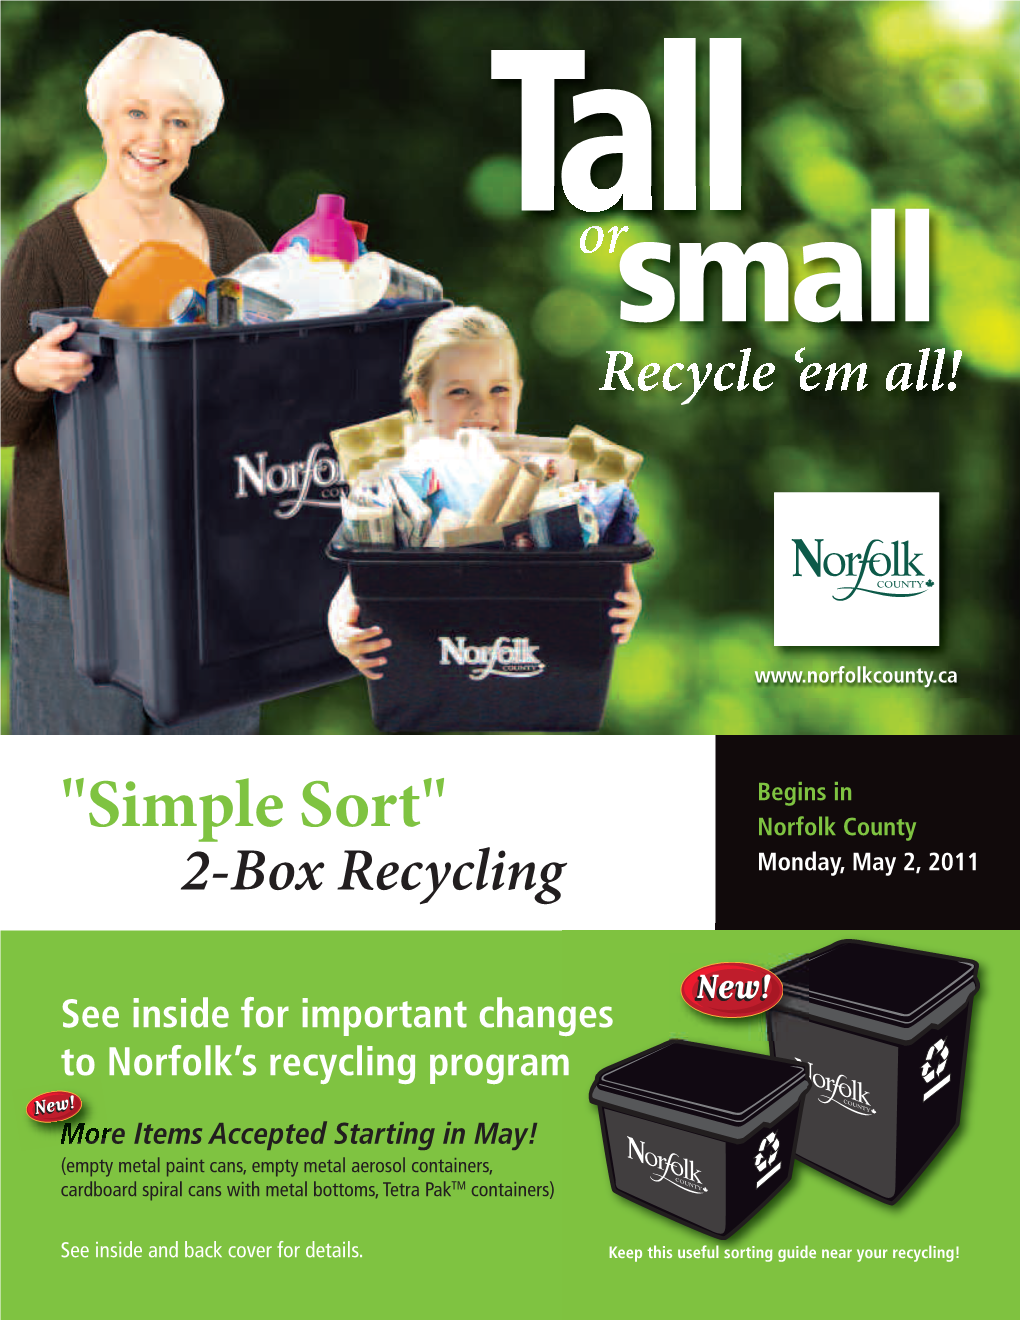 Recycle 'Em All! Or